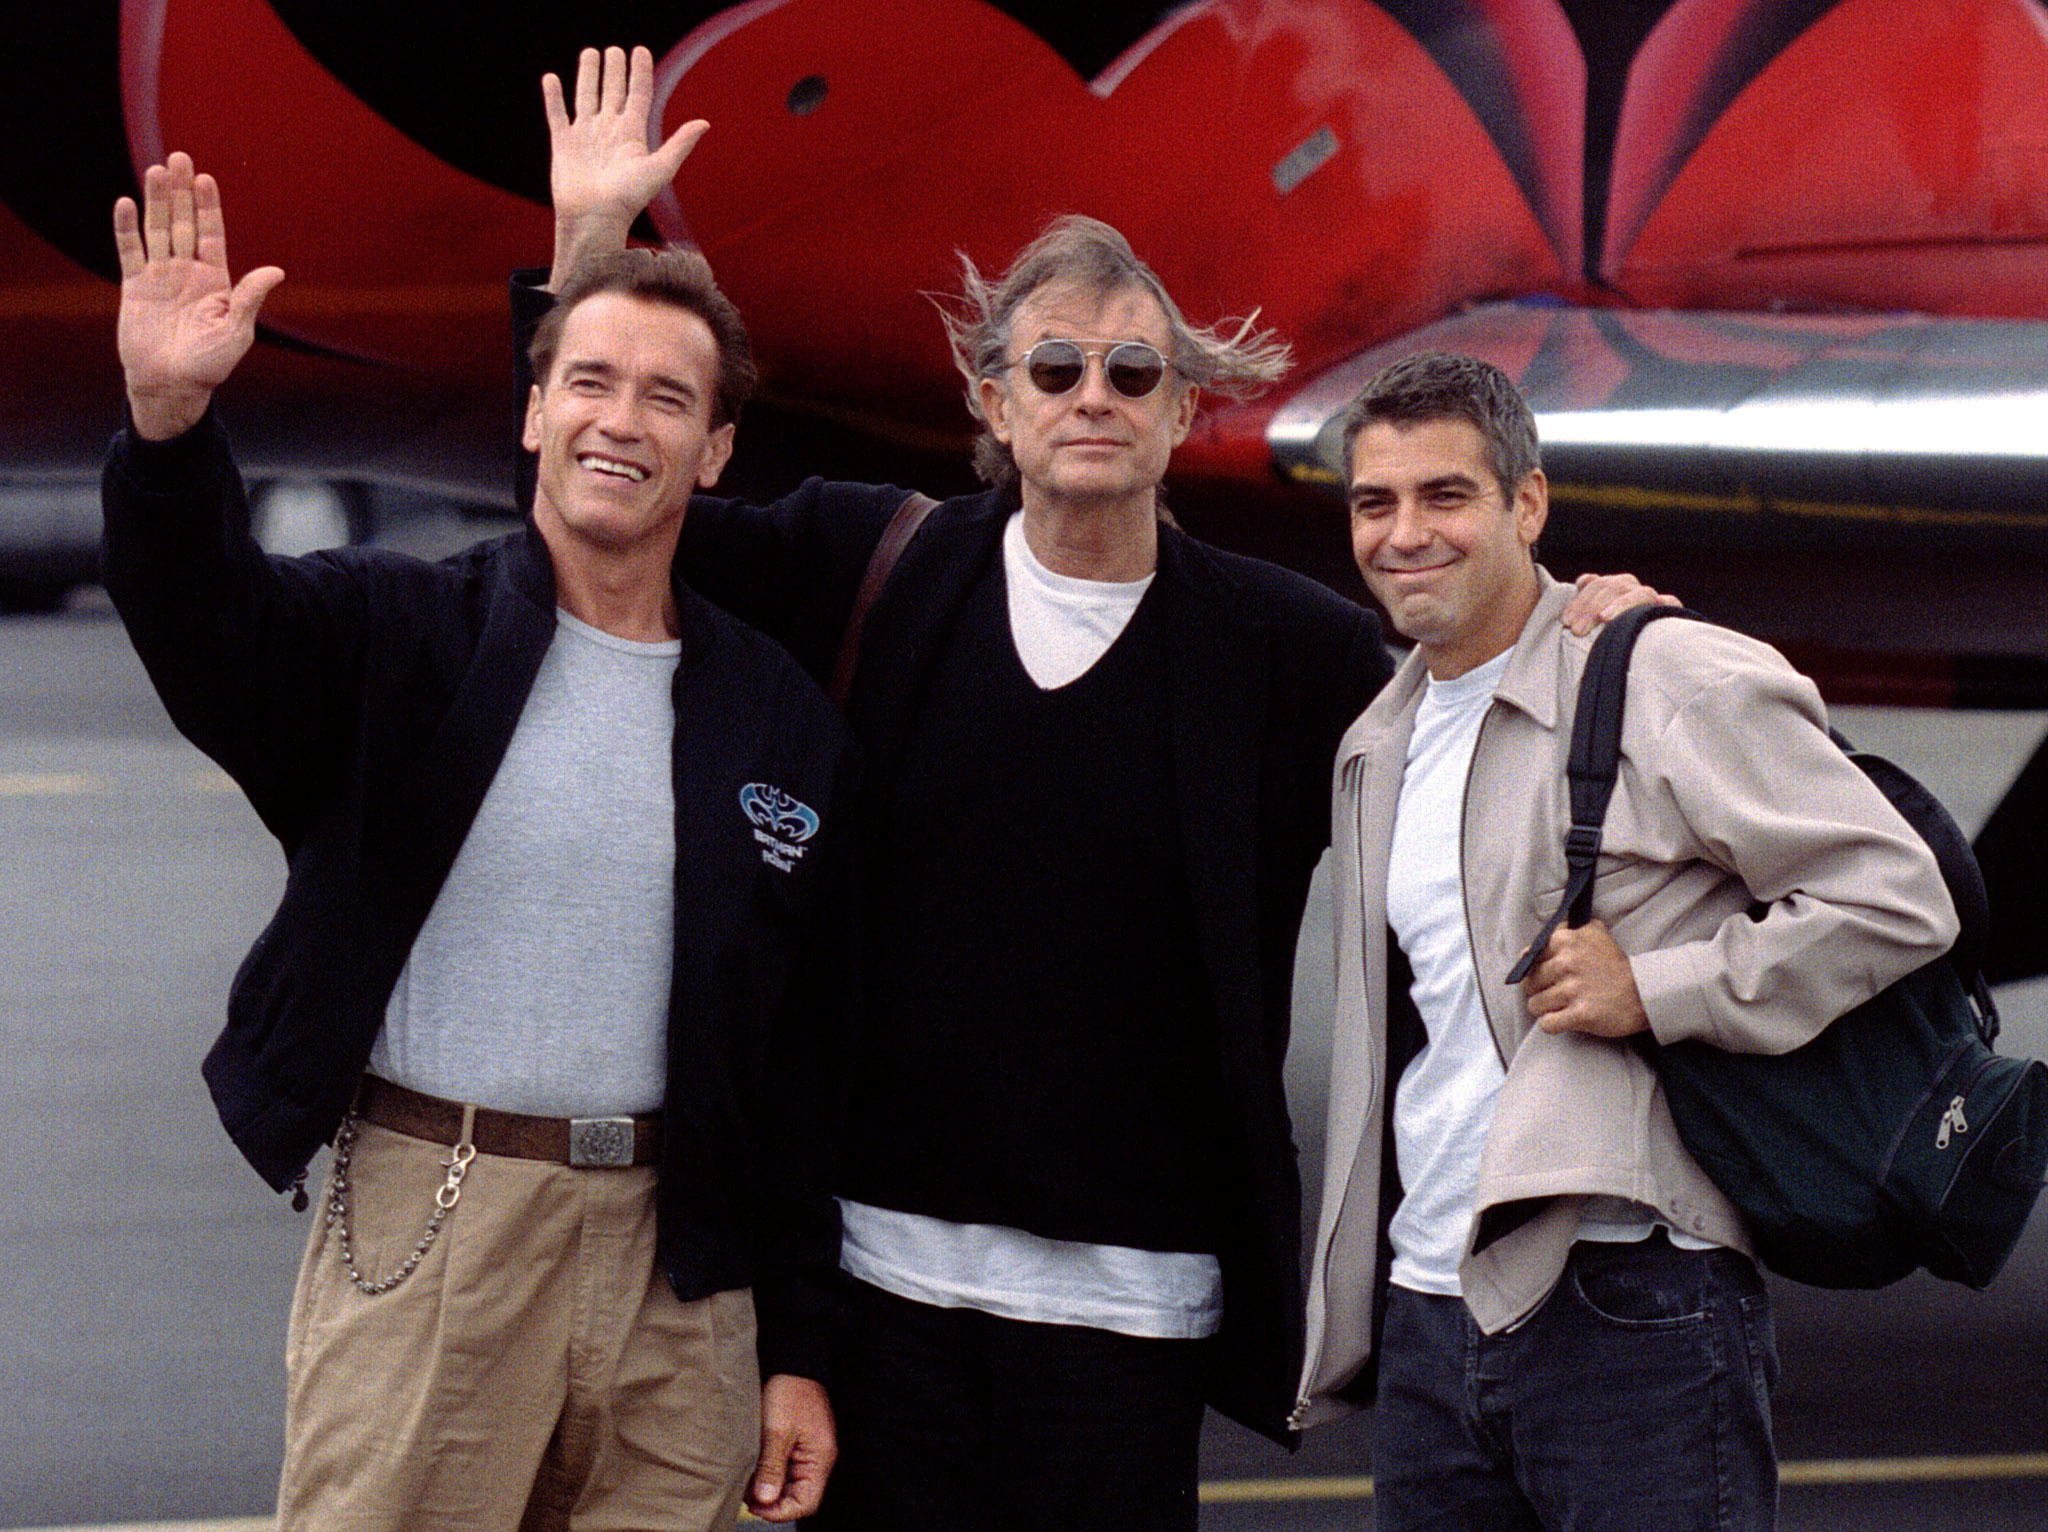 Stars of 'Batman and Robin,' Arnold Schwarzenegger (L) and George Clooney (R), and director Joel Schumacher wave at photographers after landing at Le Bourget airport near Paris, June 24. (Reuters Photo)